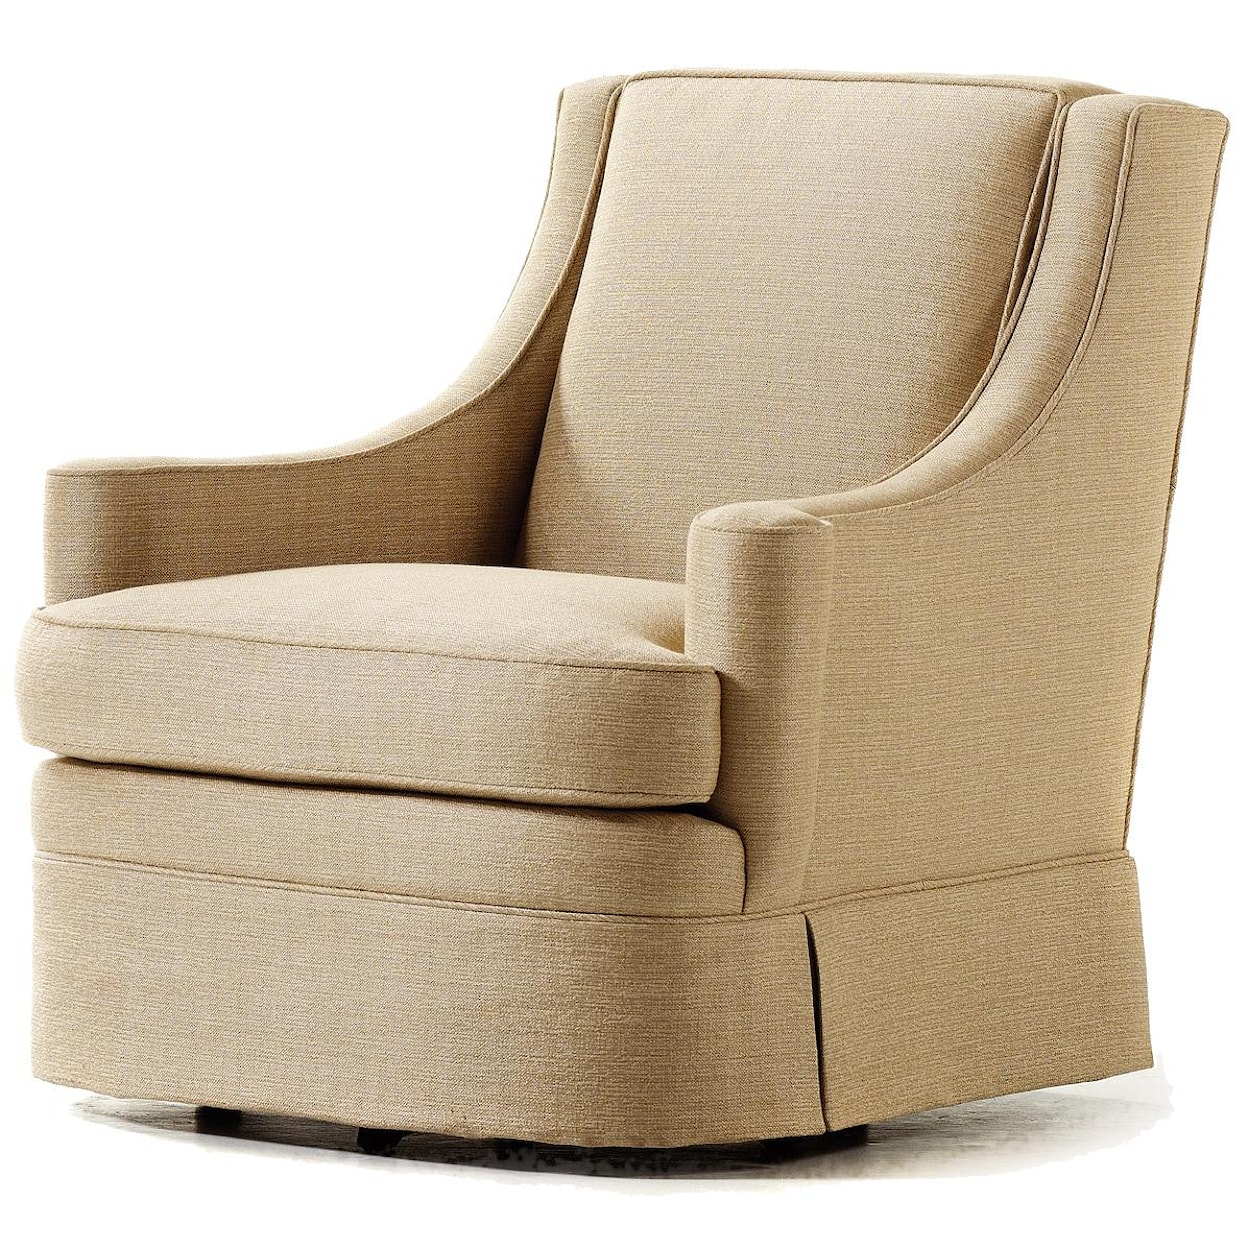 Jessica Charles Fine Upholstered Accents Jackie Swivel Rocker   